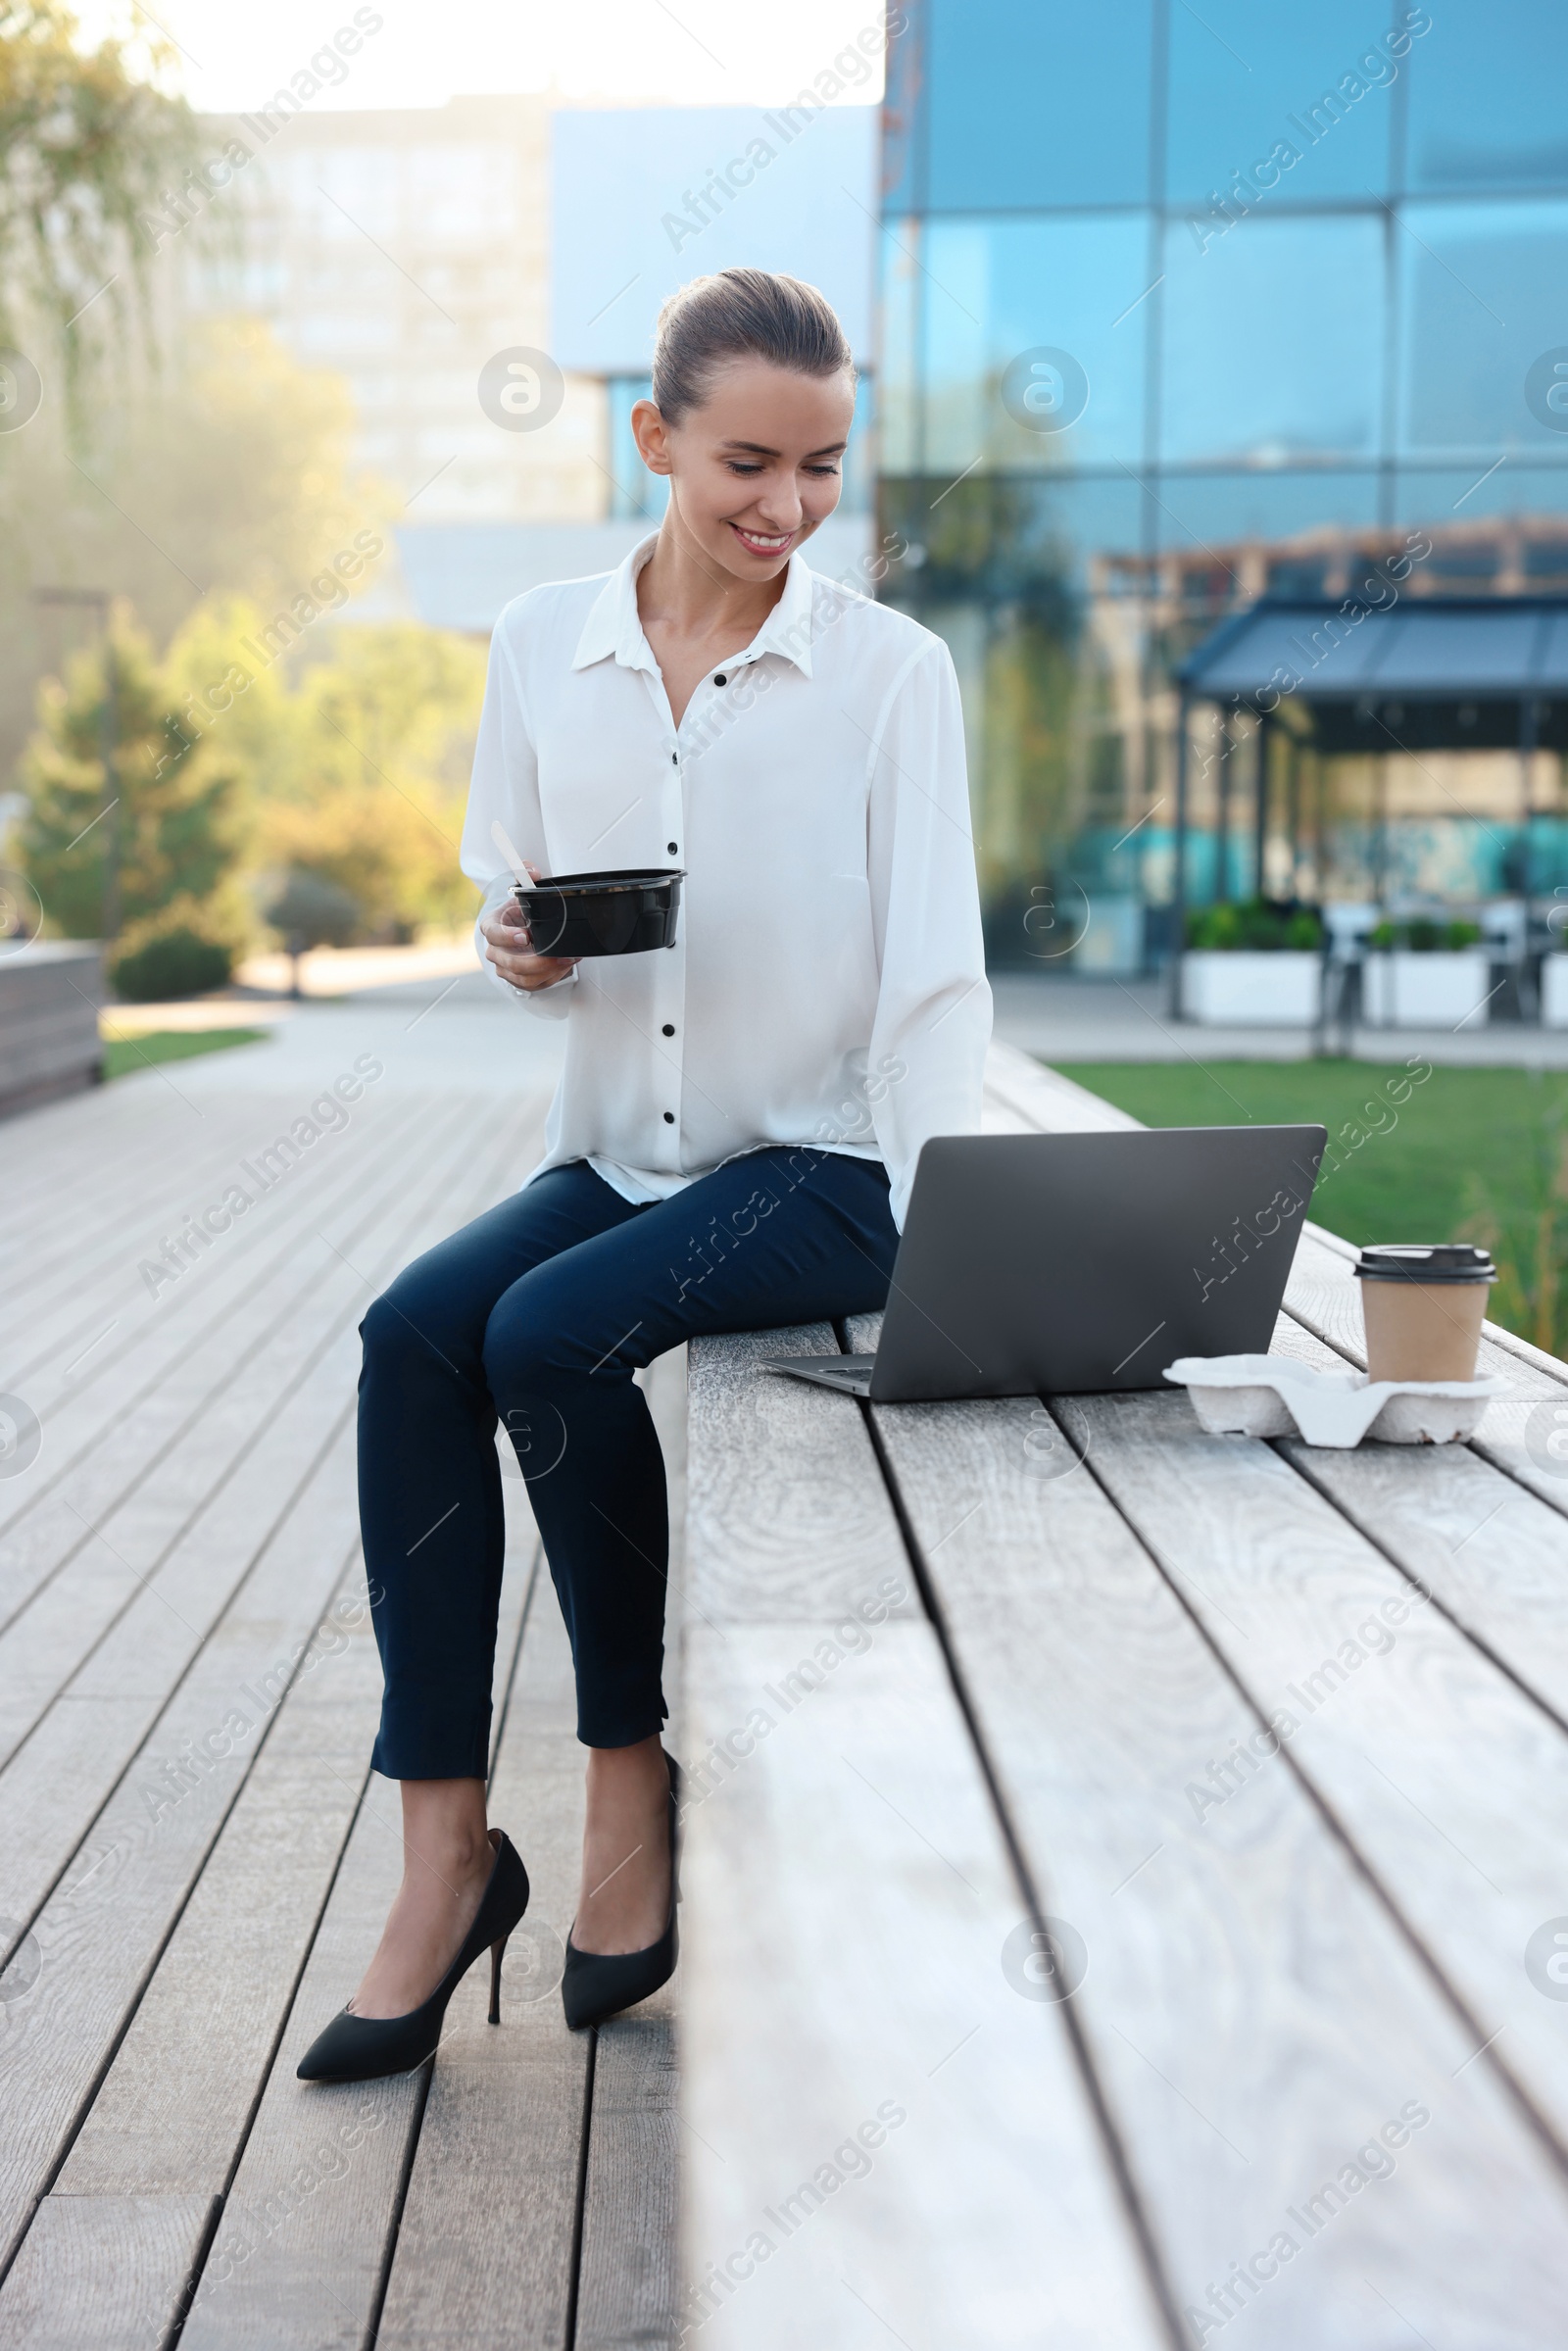 Photo of Smiling businesswoman holding lunch box and working with laptop outdoors